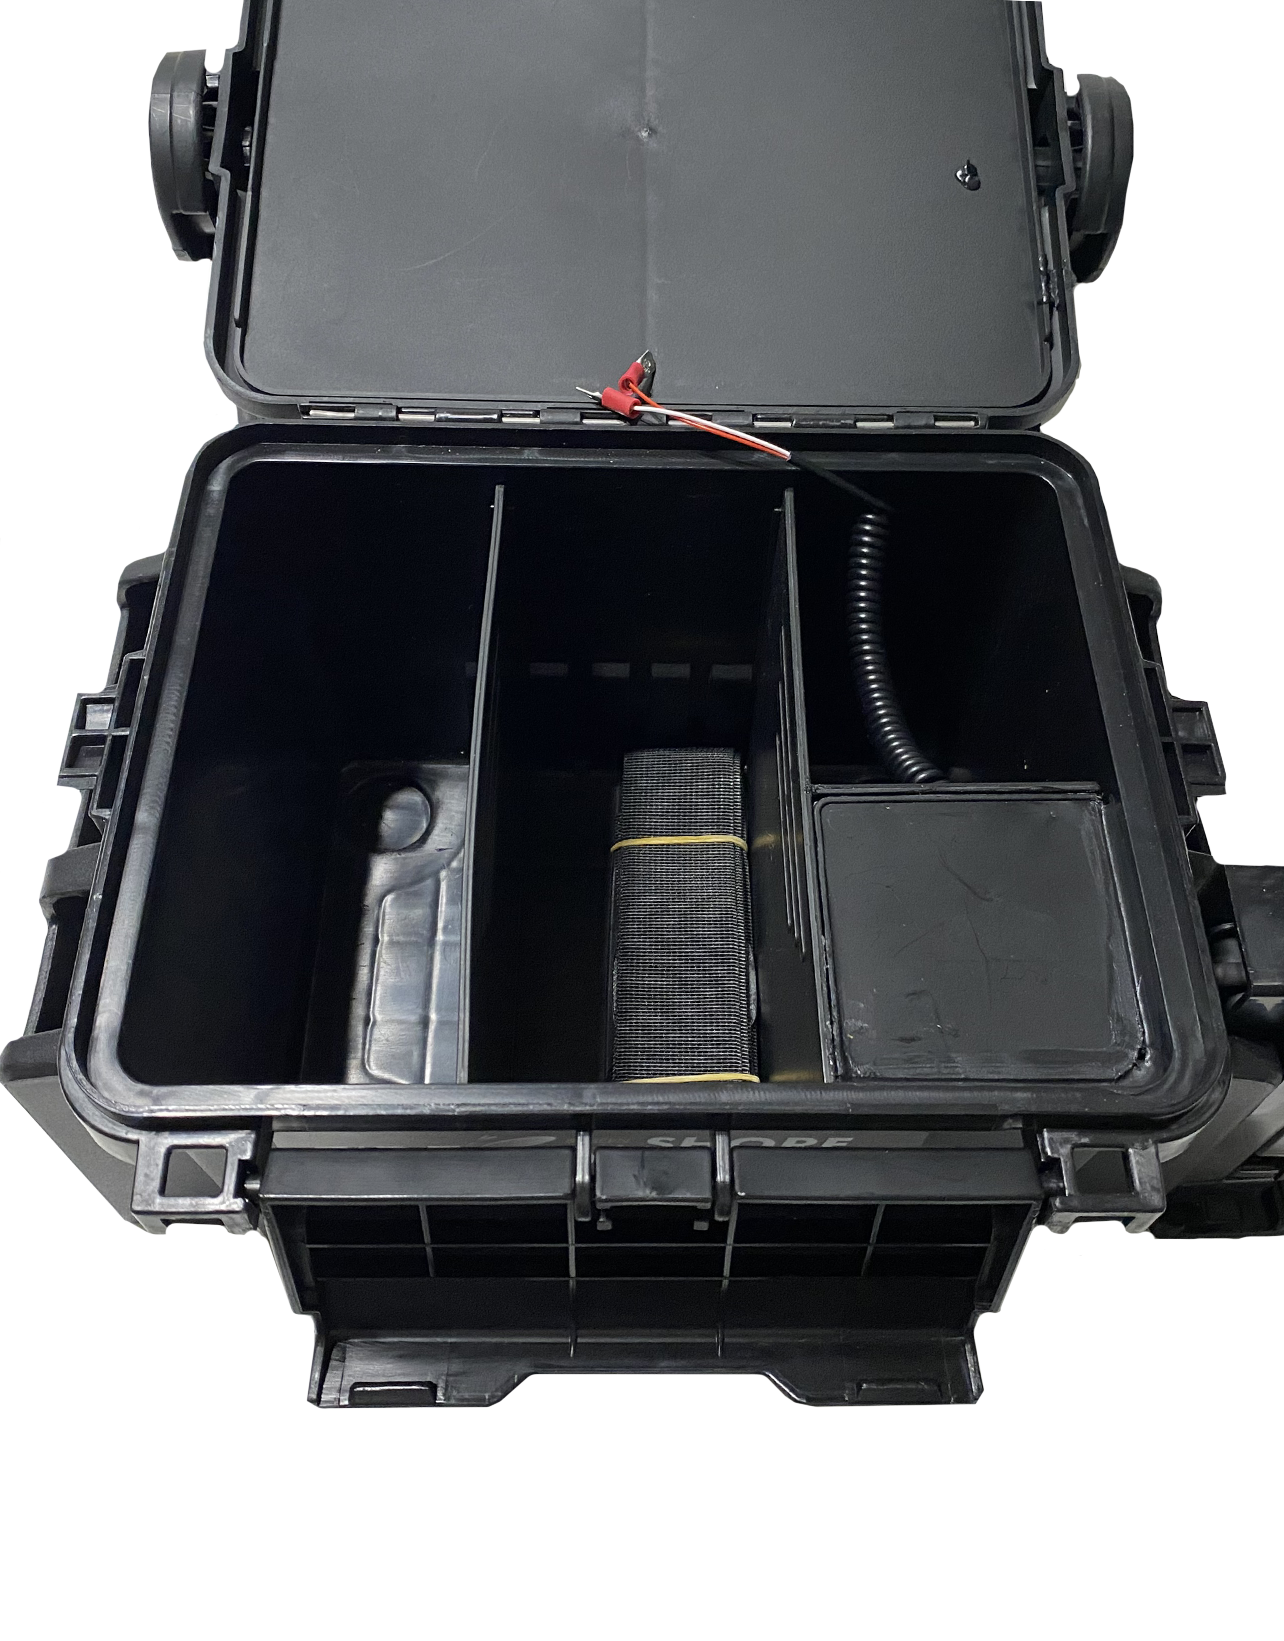 12X12X6 Hat Box - Hb-12126 - Firefly Solutions